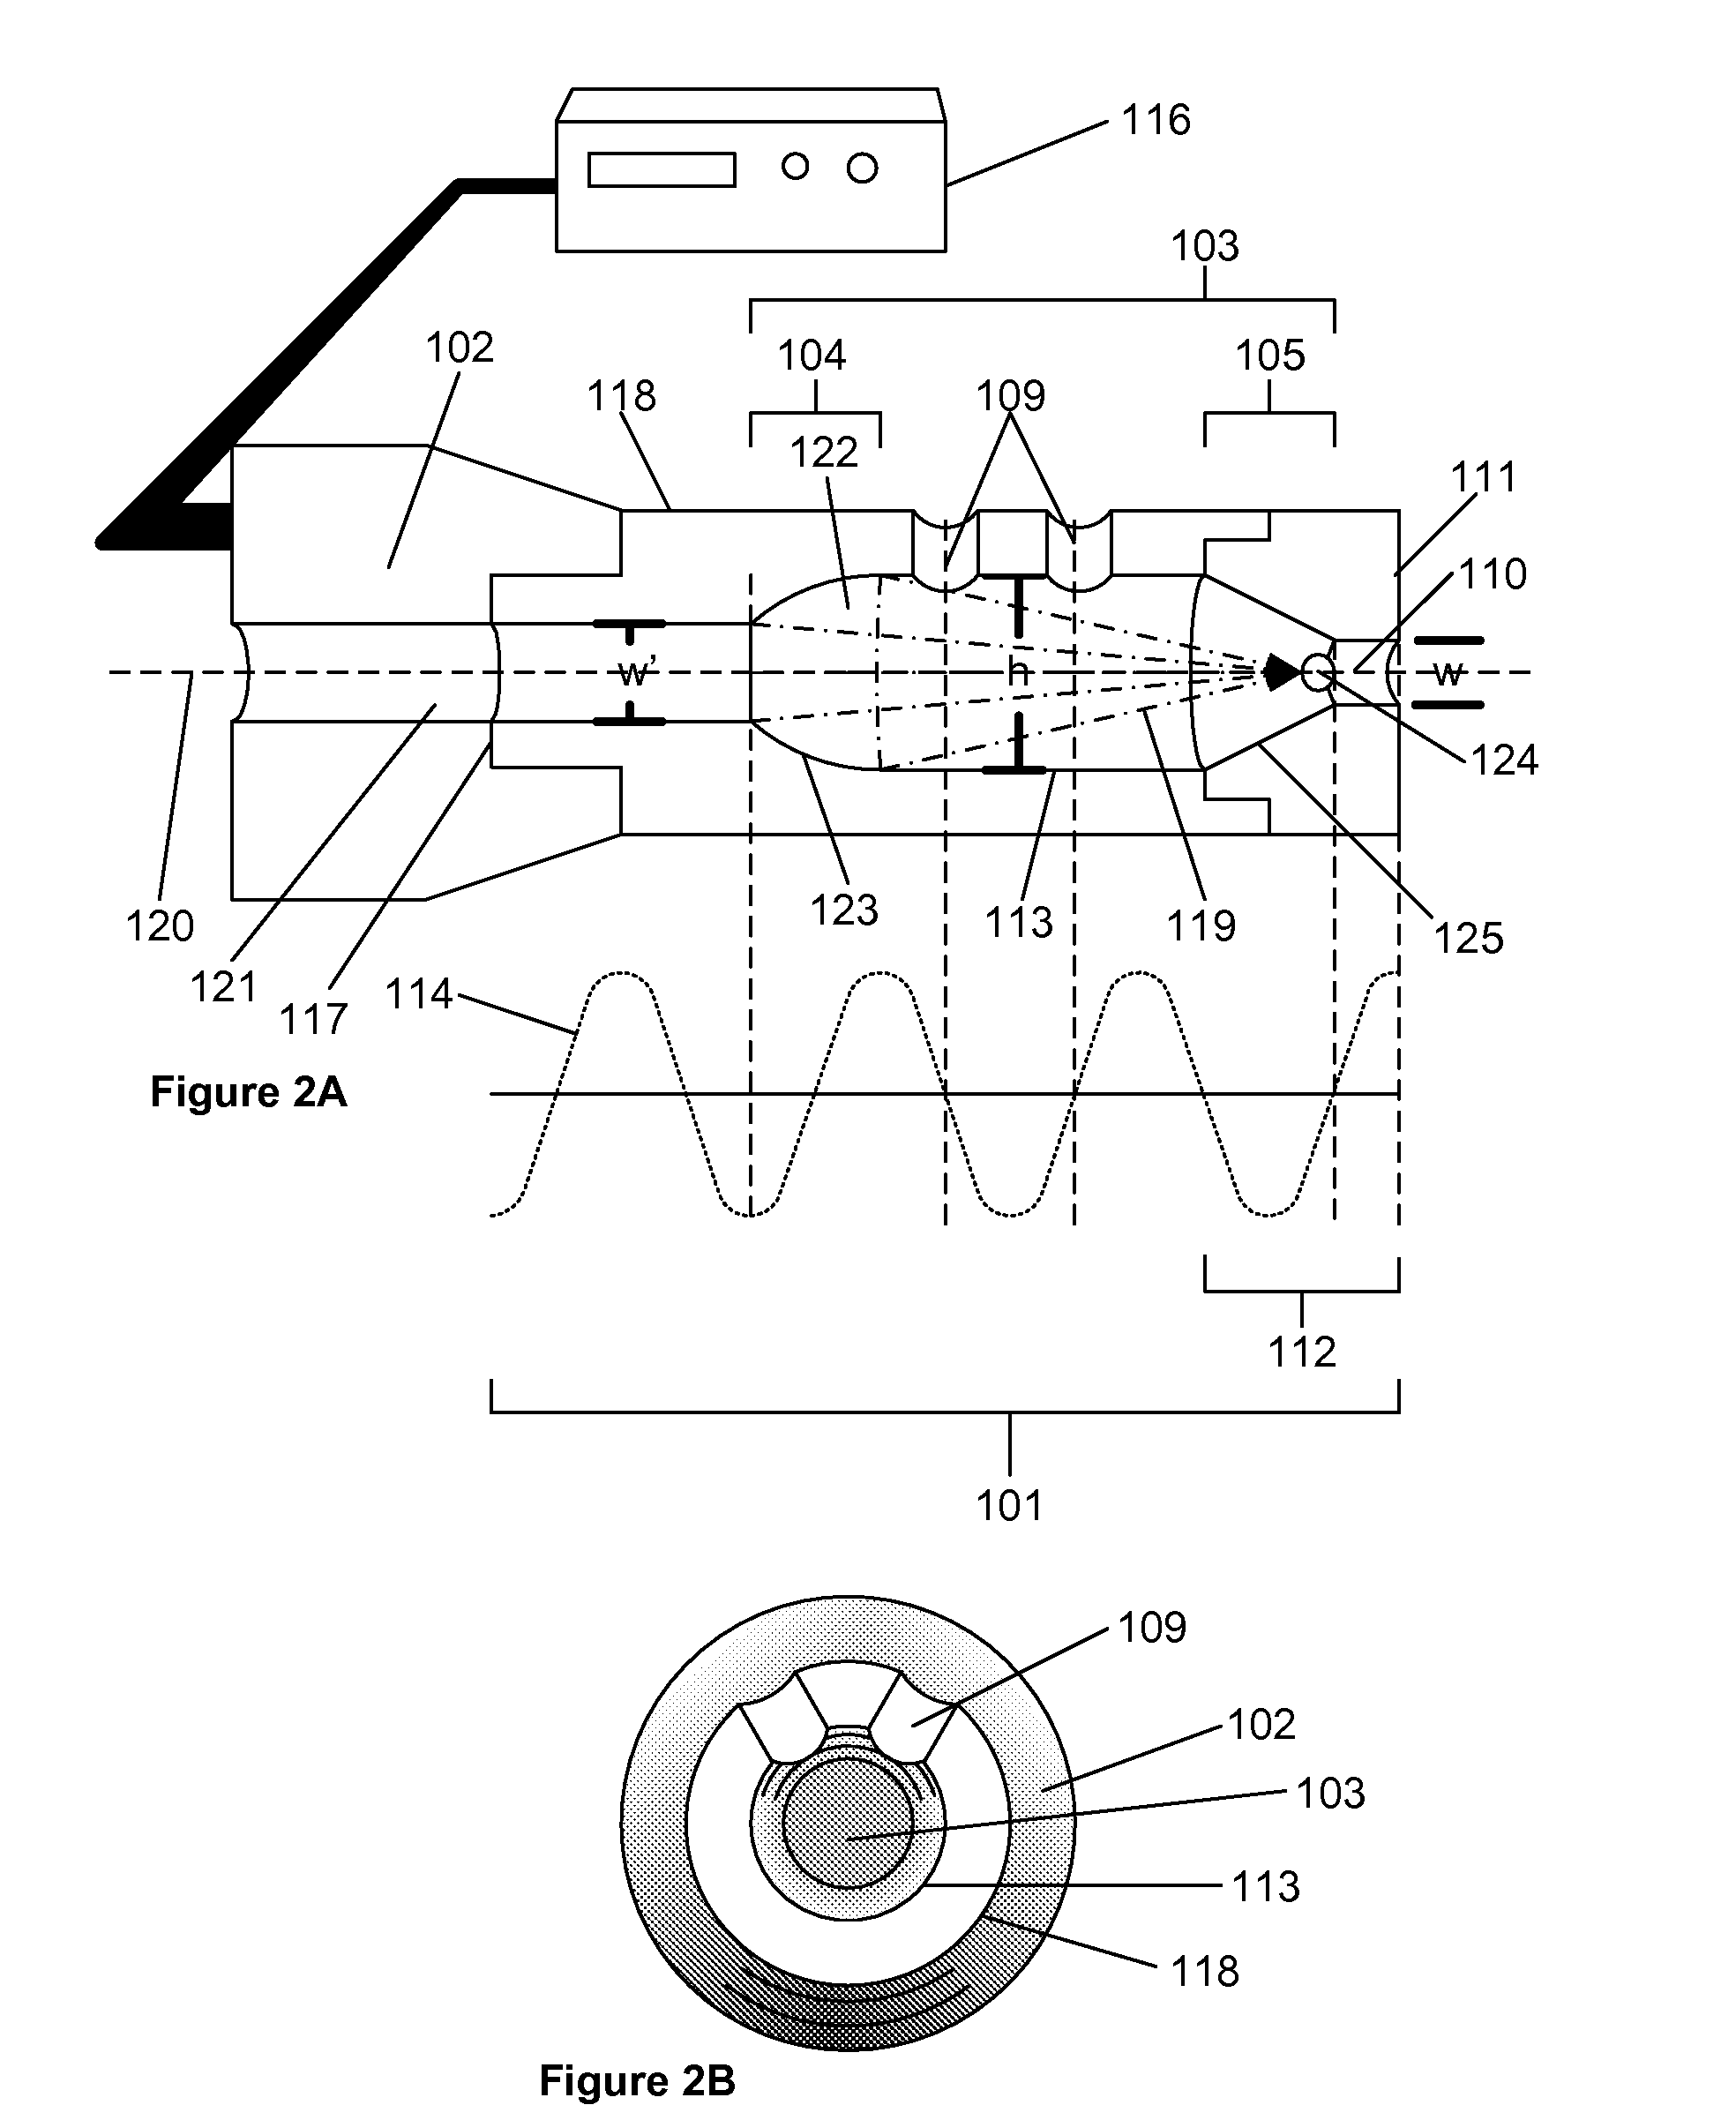 Method of treating wounds by creating a therapeutic solution with ultrasonic waves